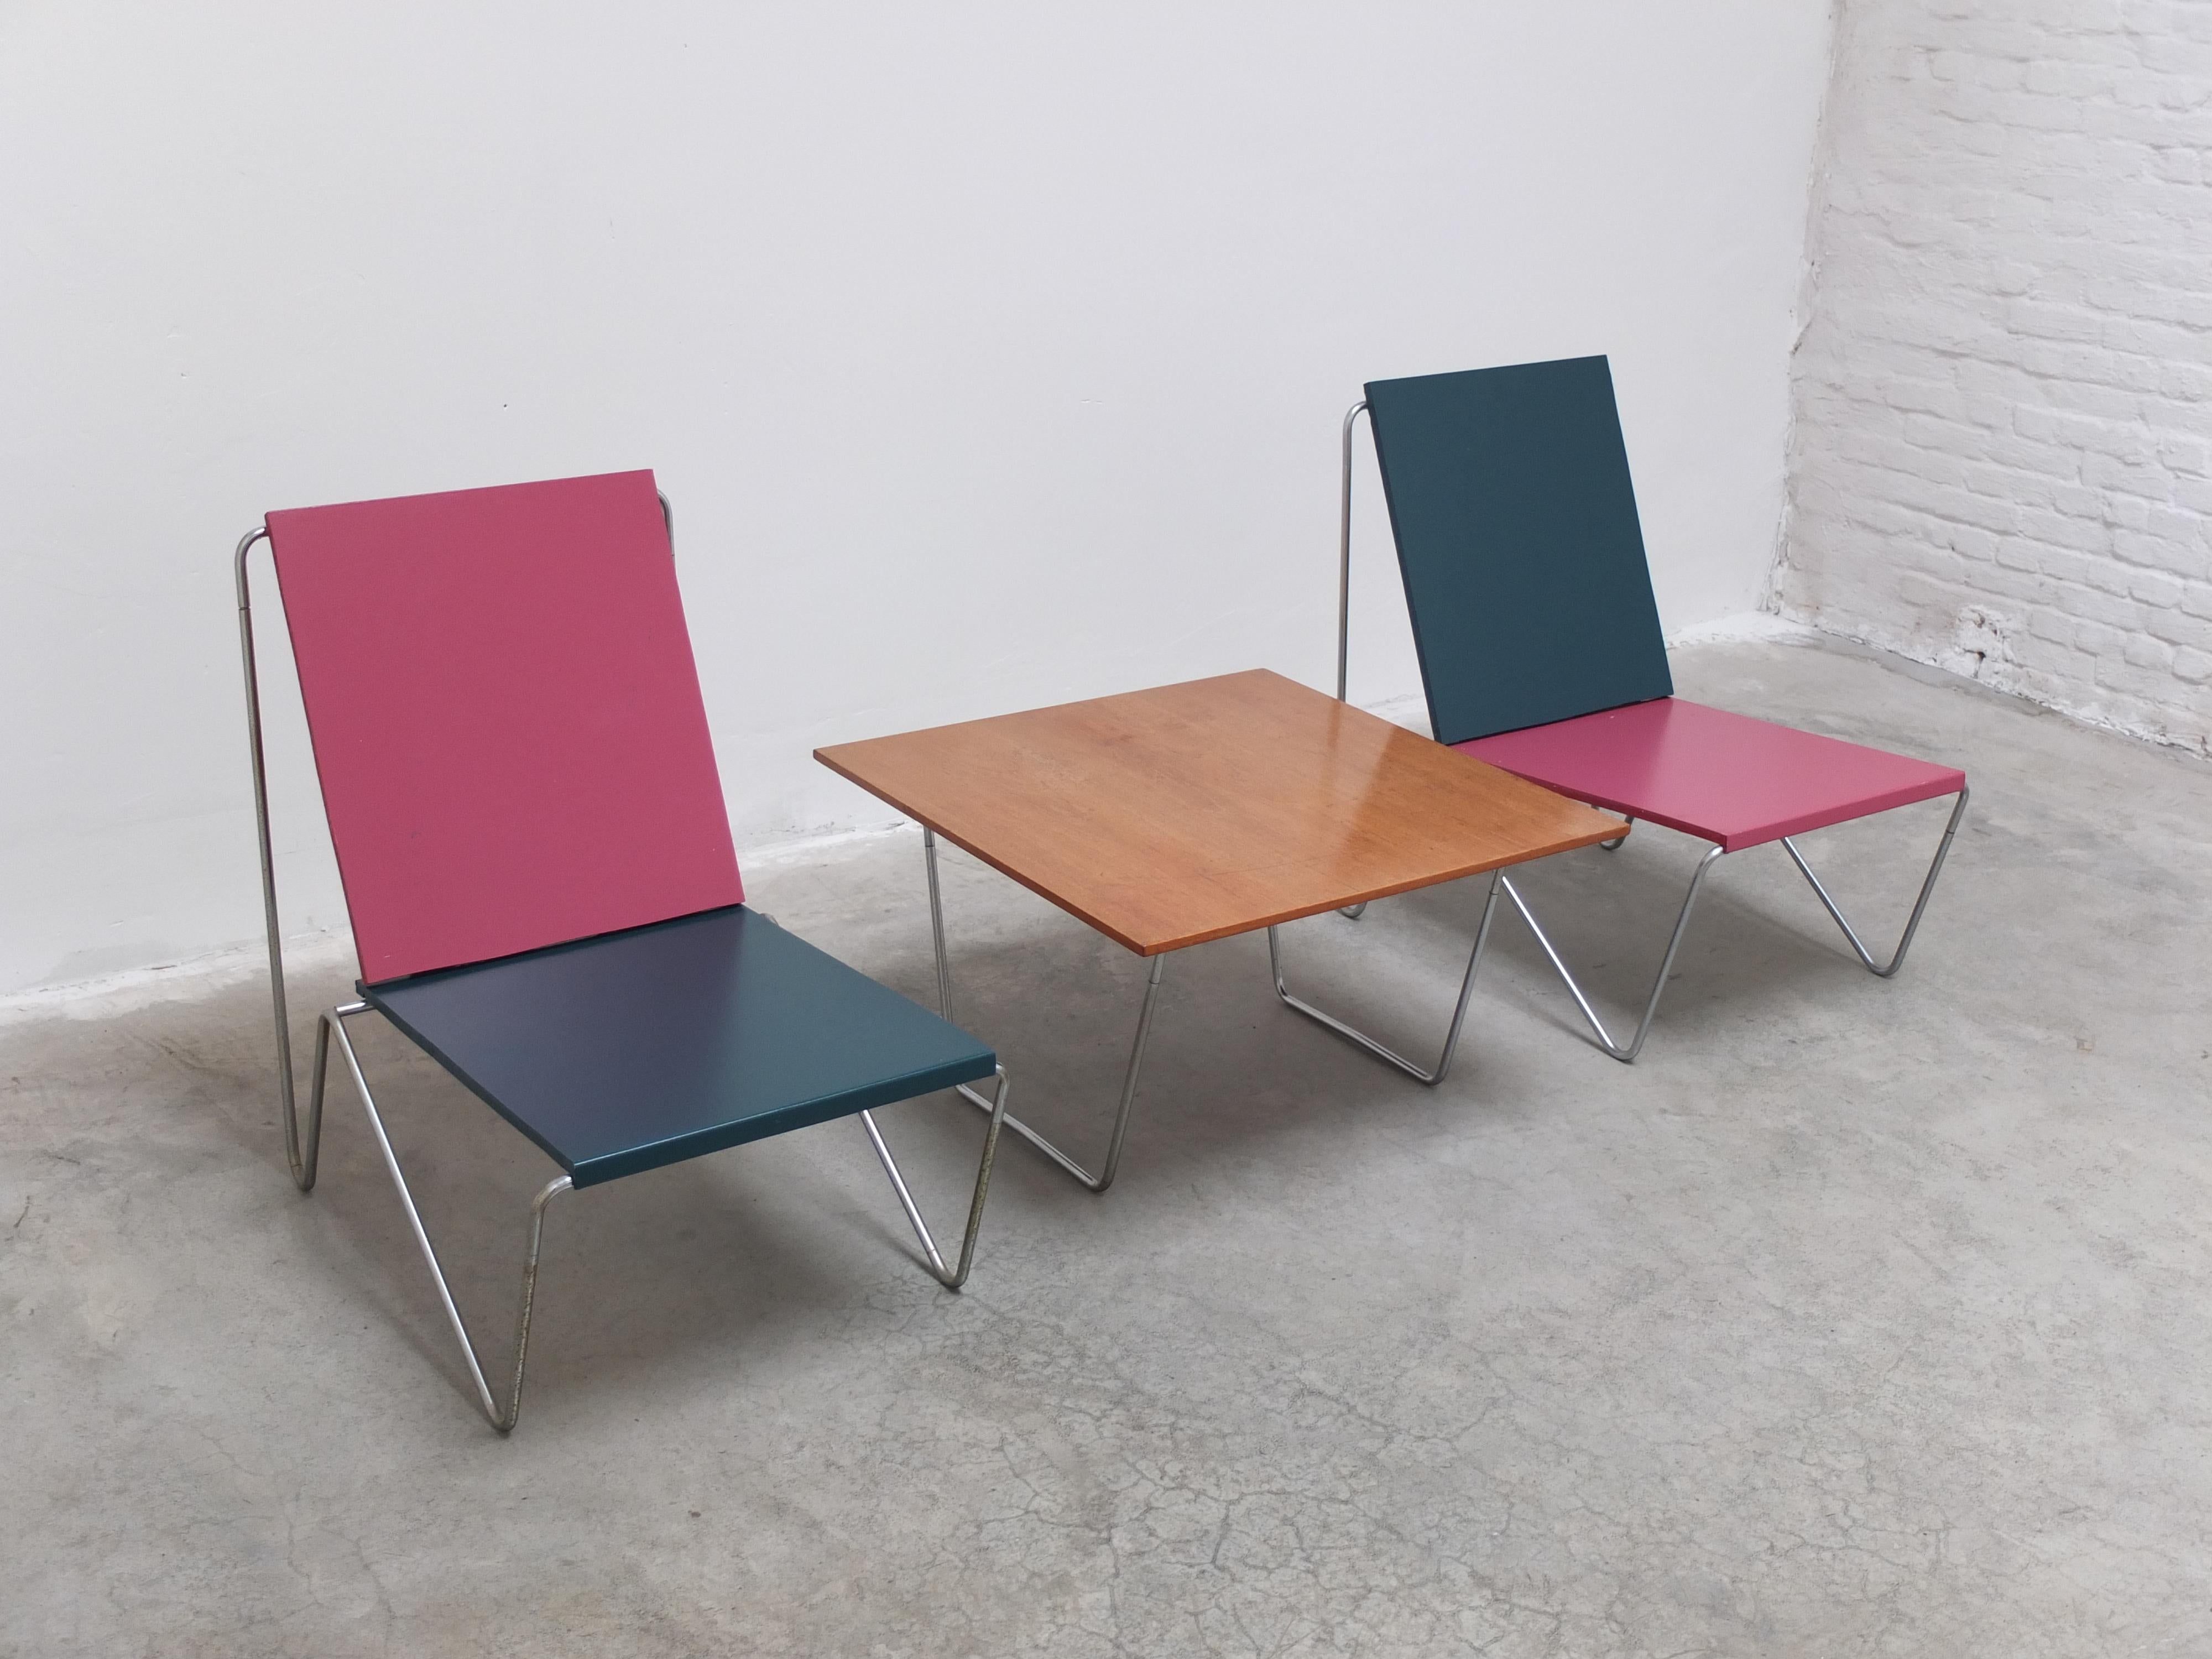 Unique Pair of 'Bachelor' Chairs by Verner Panton for Fritz Hansen, 1971 For Sale 11